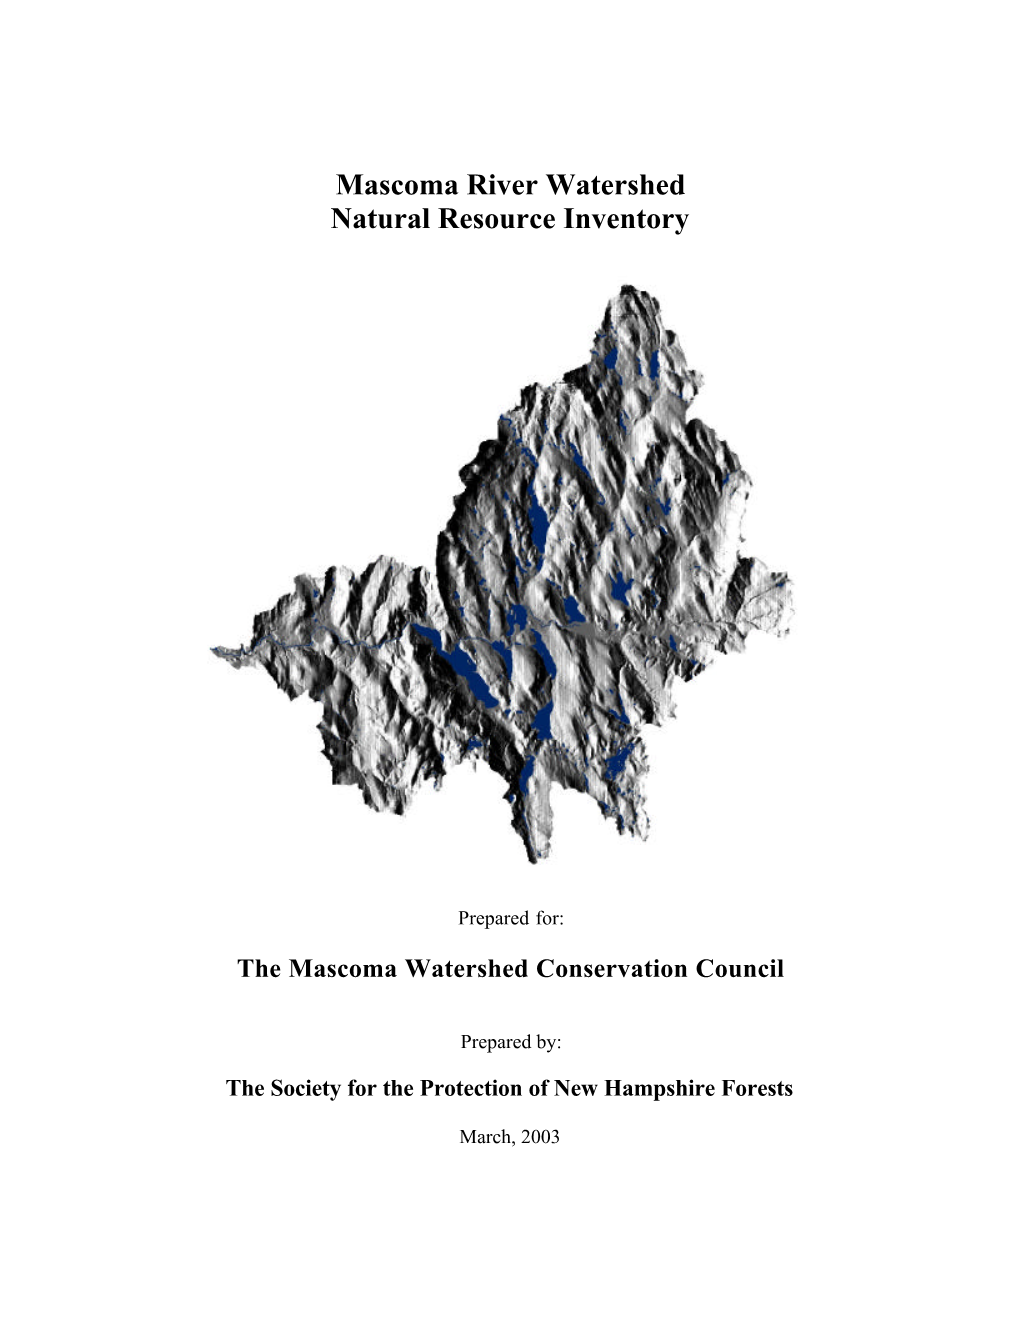 Mascoma River Watershed Natural Resource Inventory